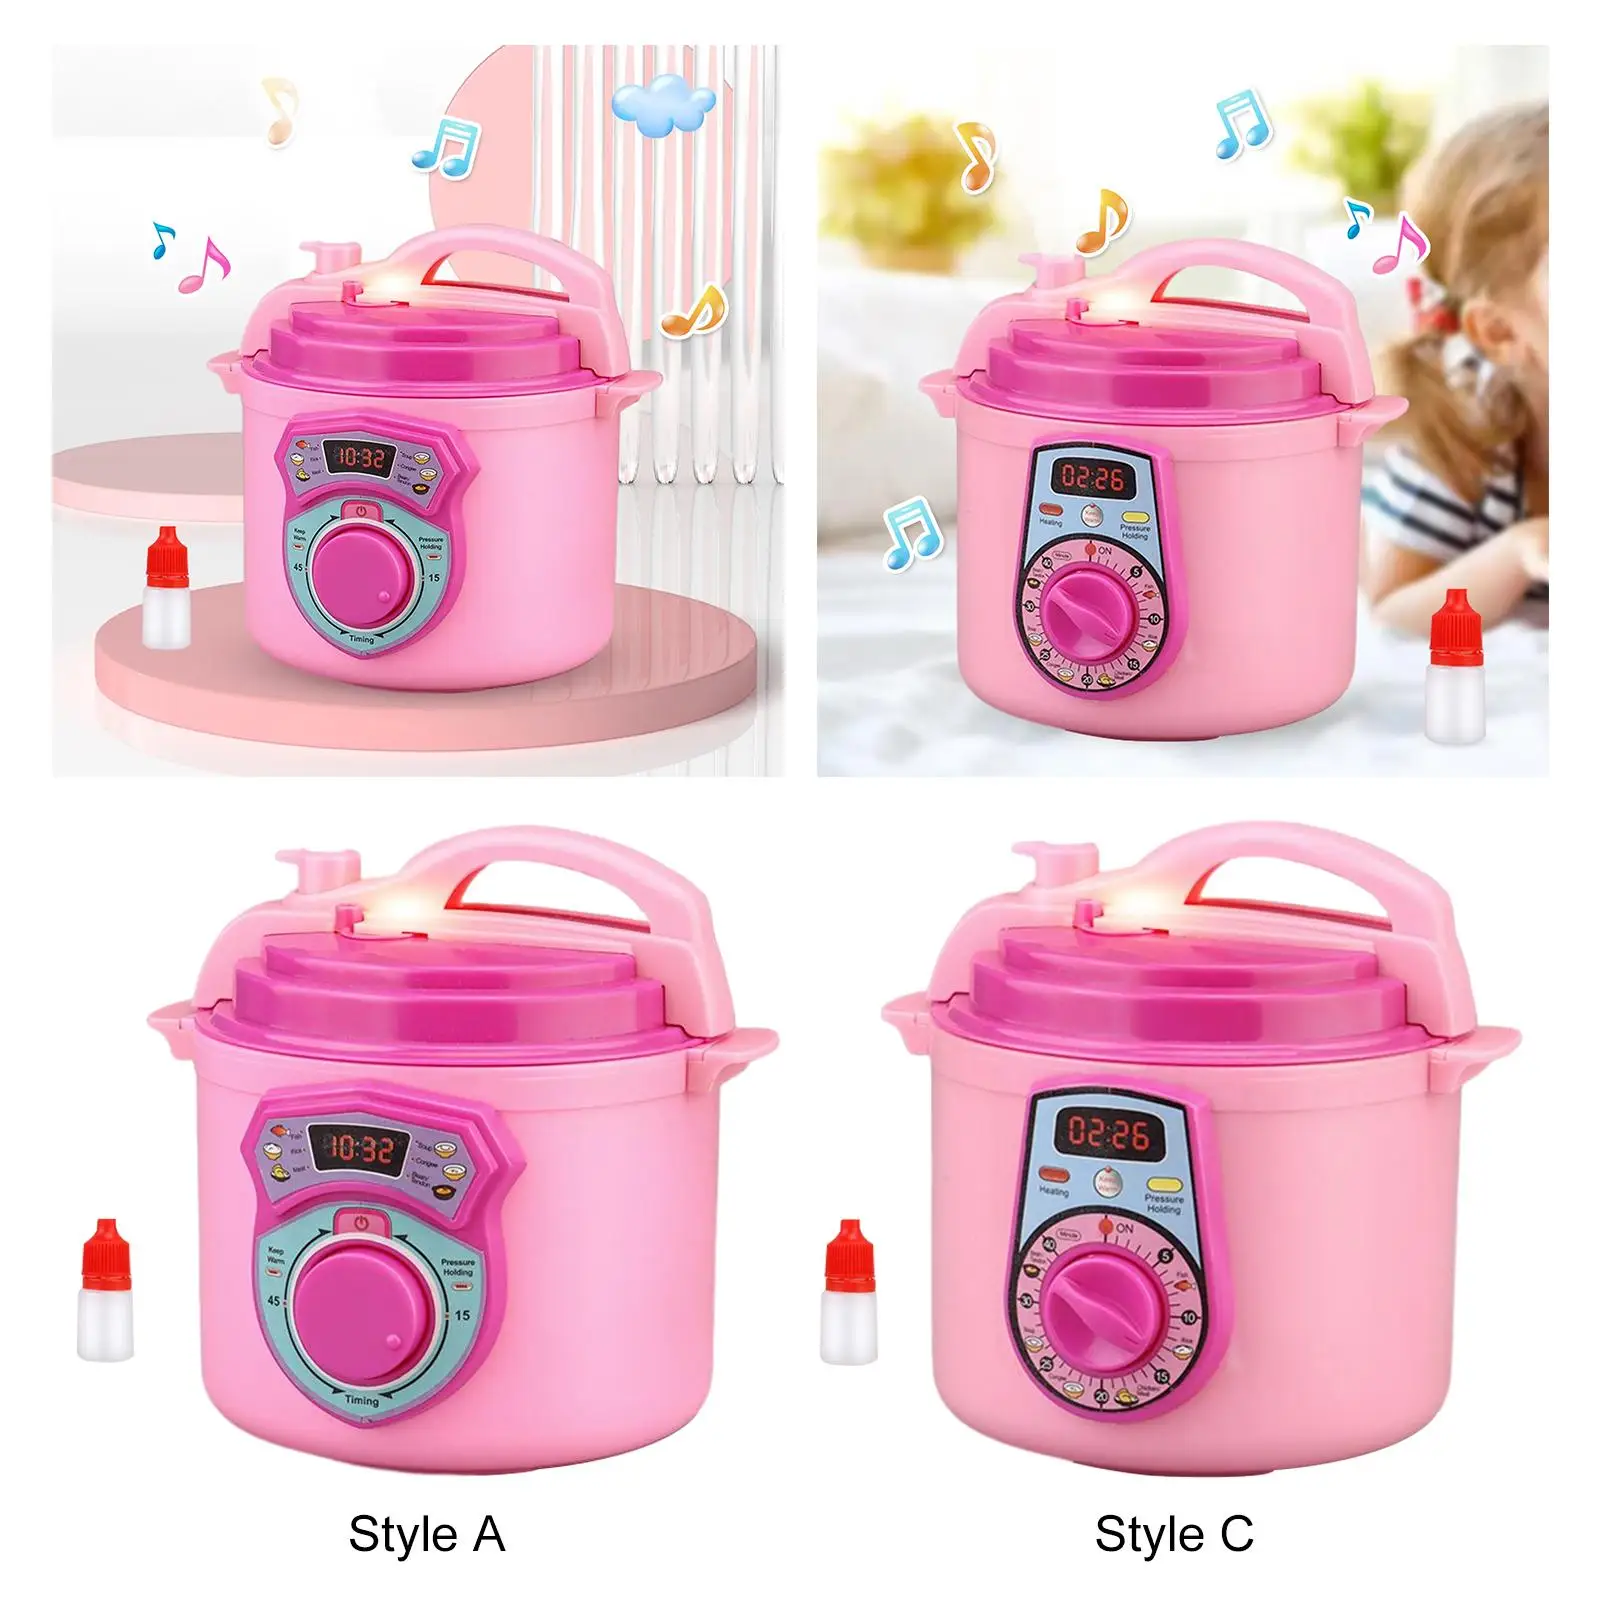 Electric Rice Cooker Toy Role Playing Toy Learning Educational Toy Mini with Lights Sound for Boy Children Girl